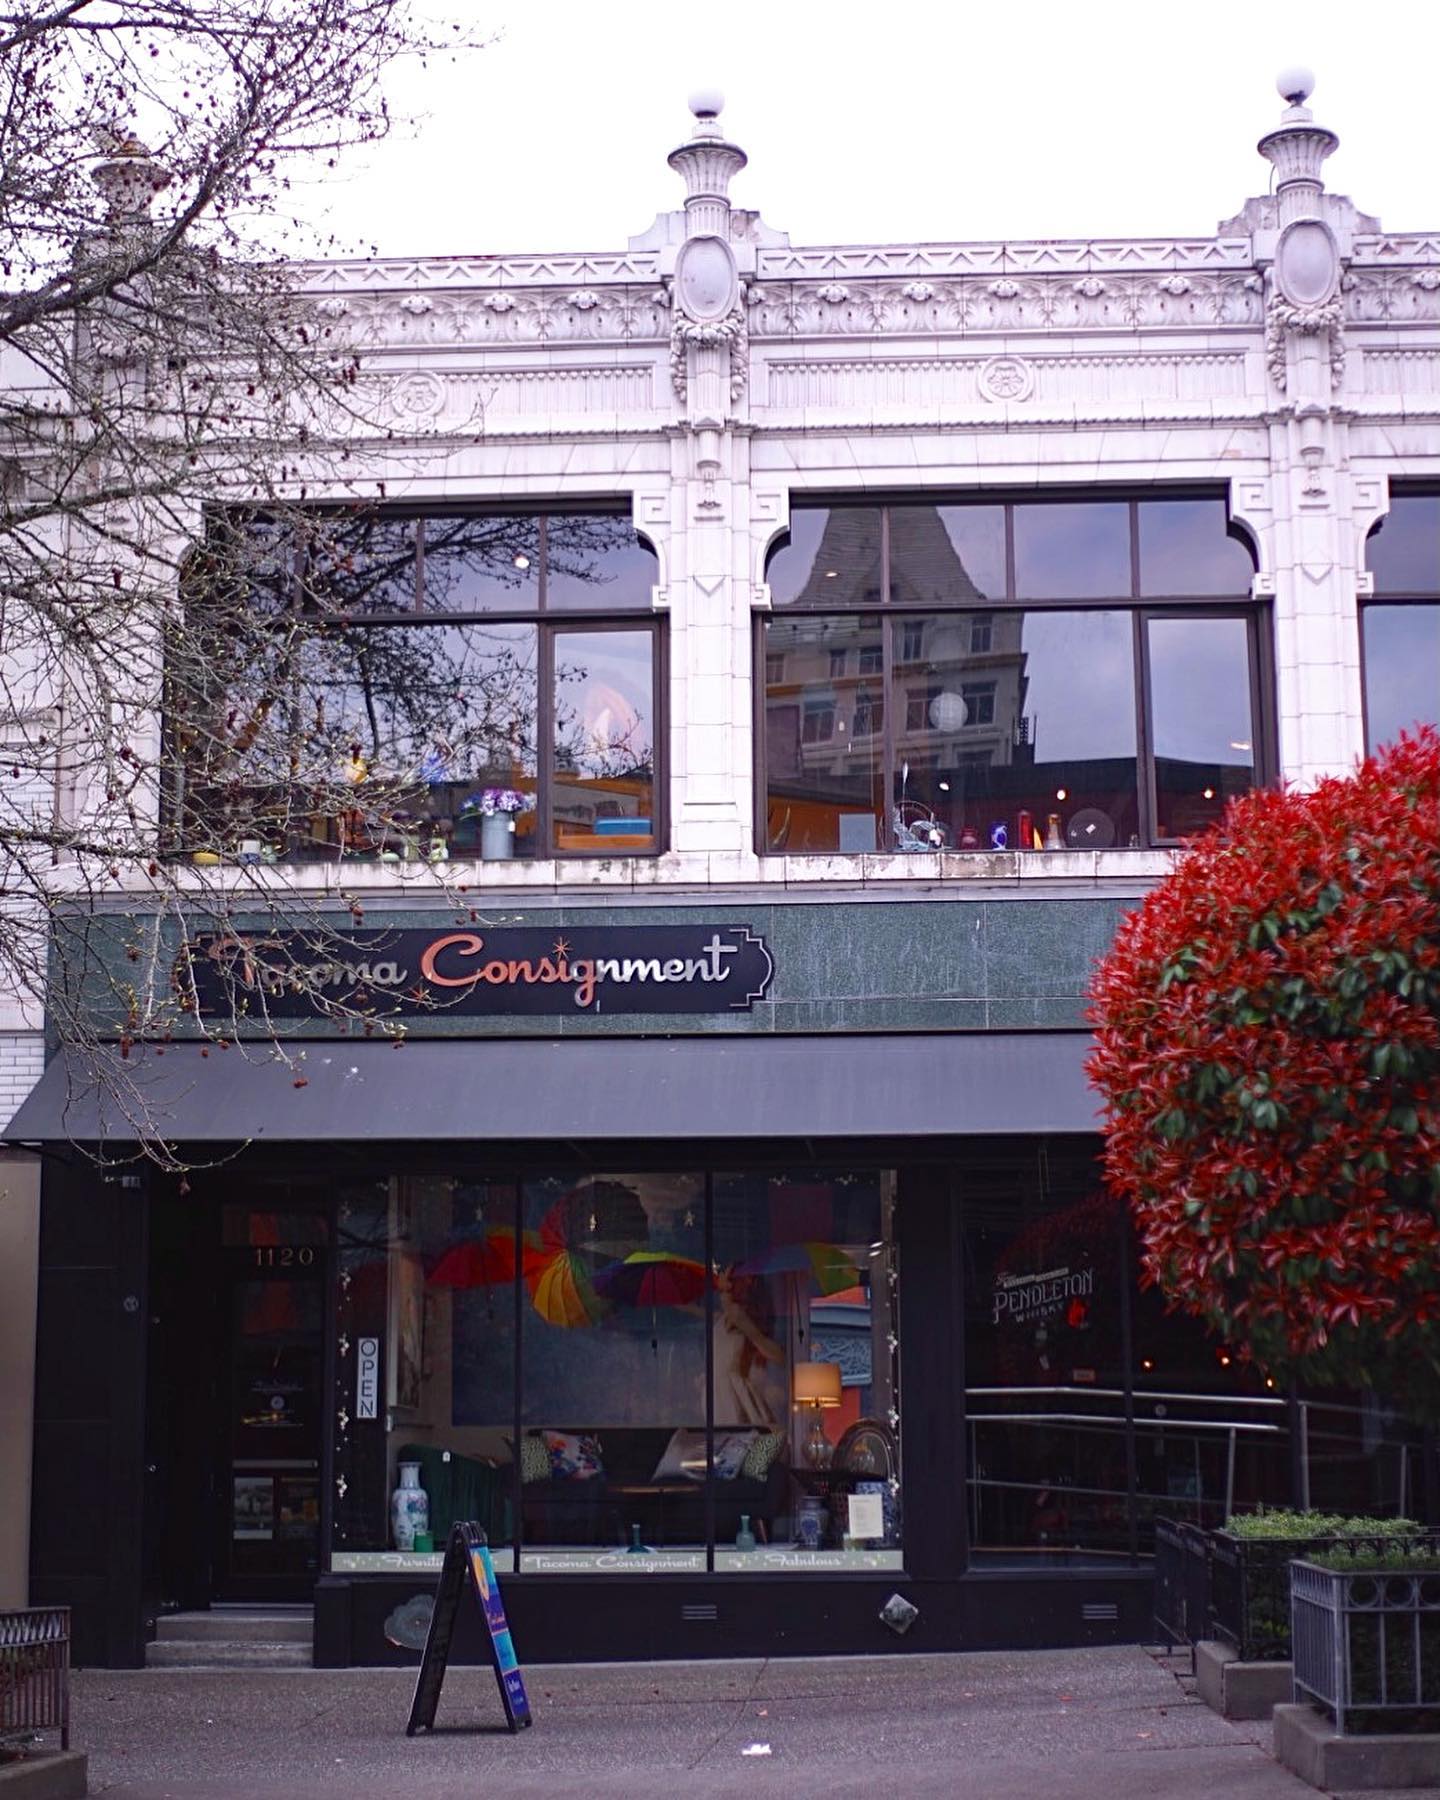 The exterior of Tacoma Consignment